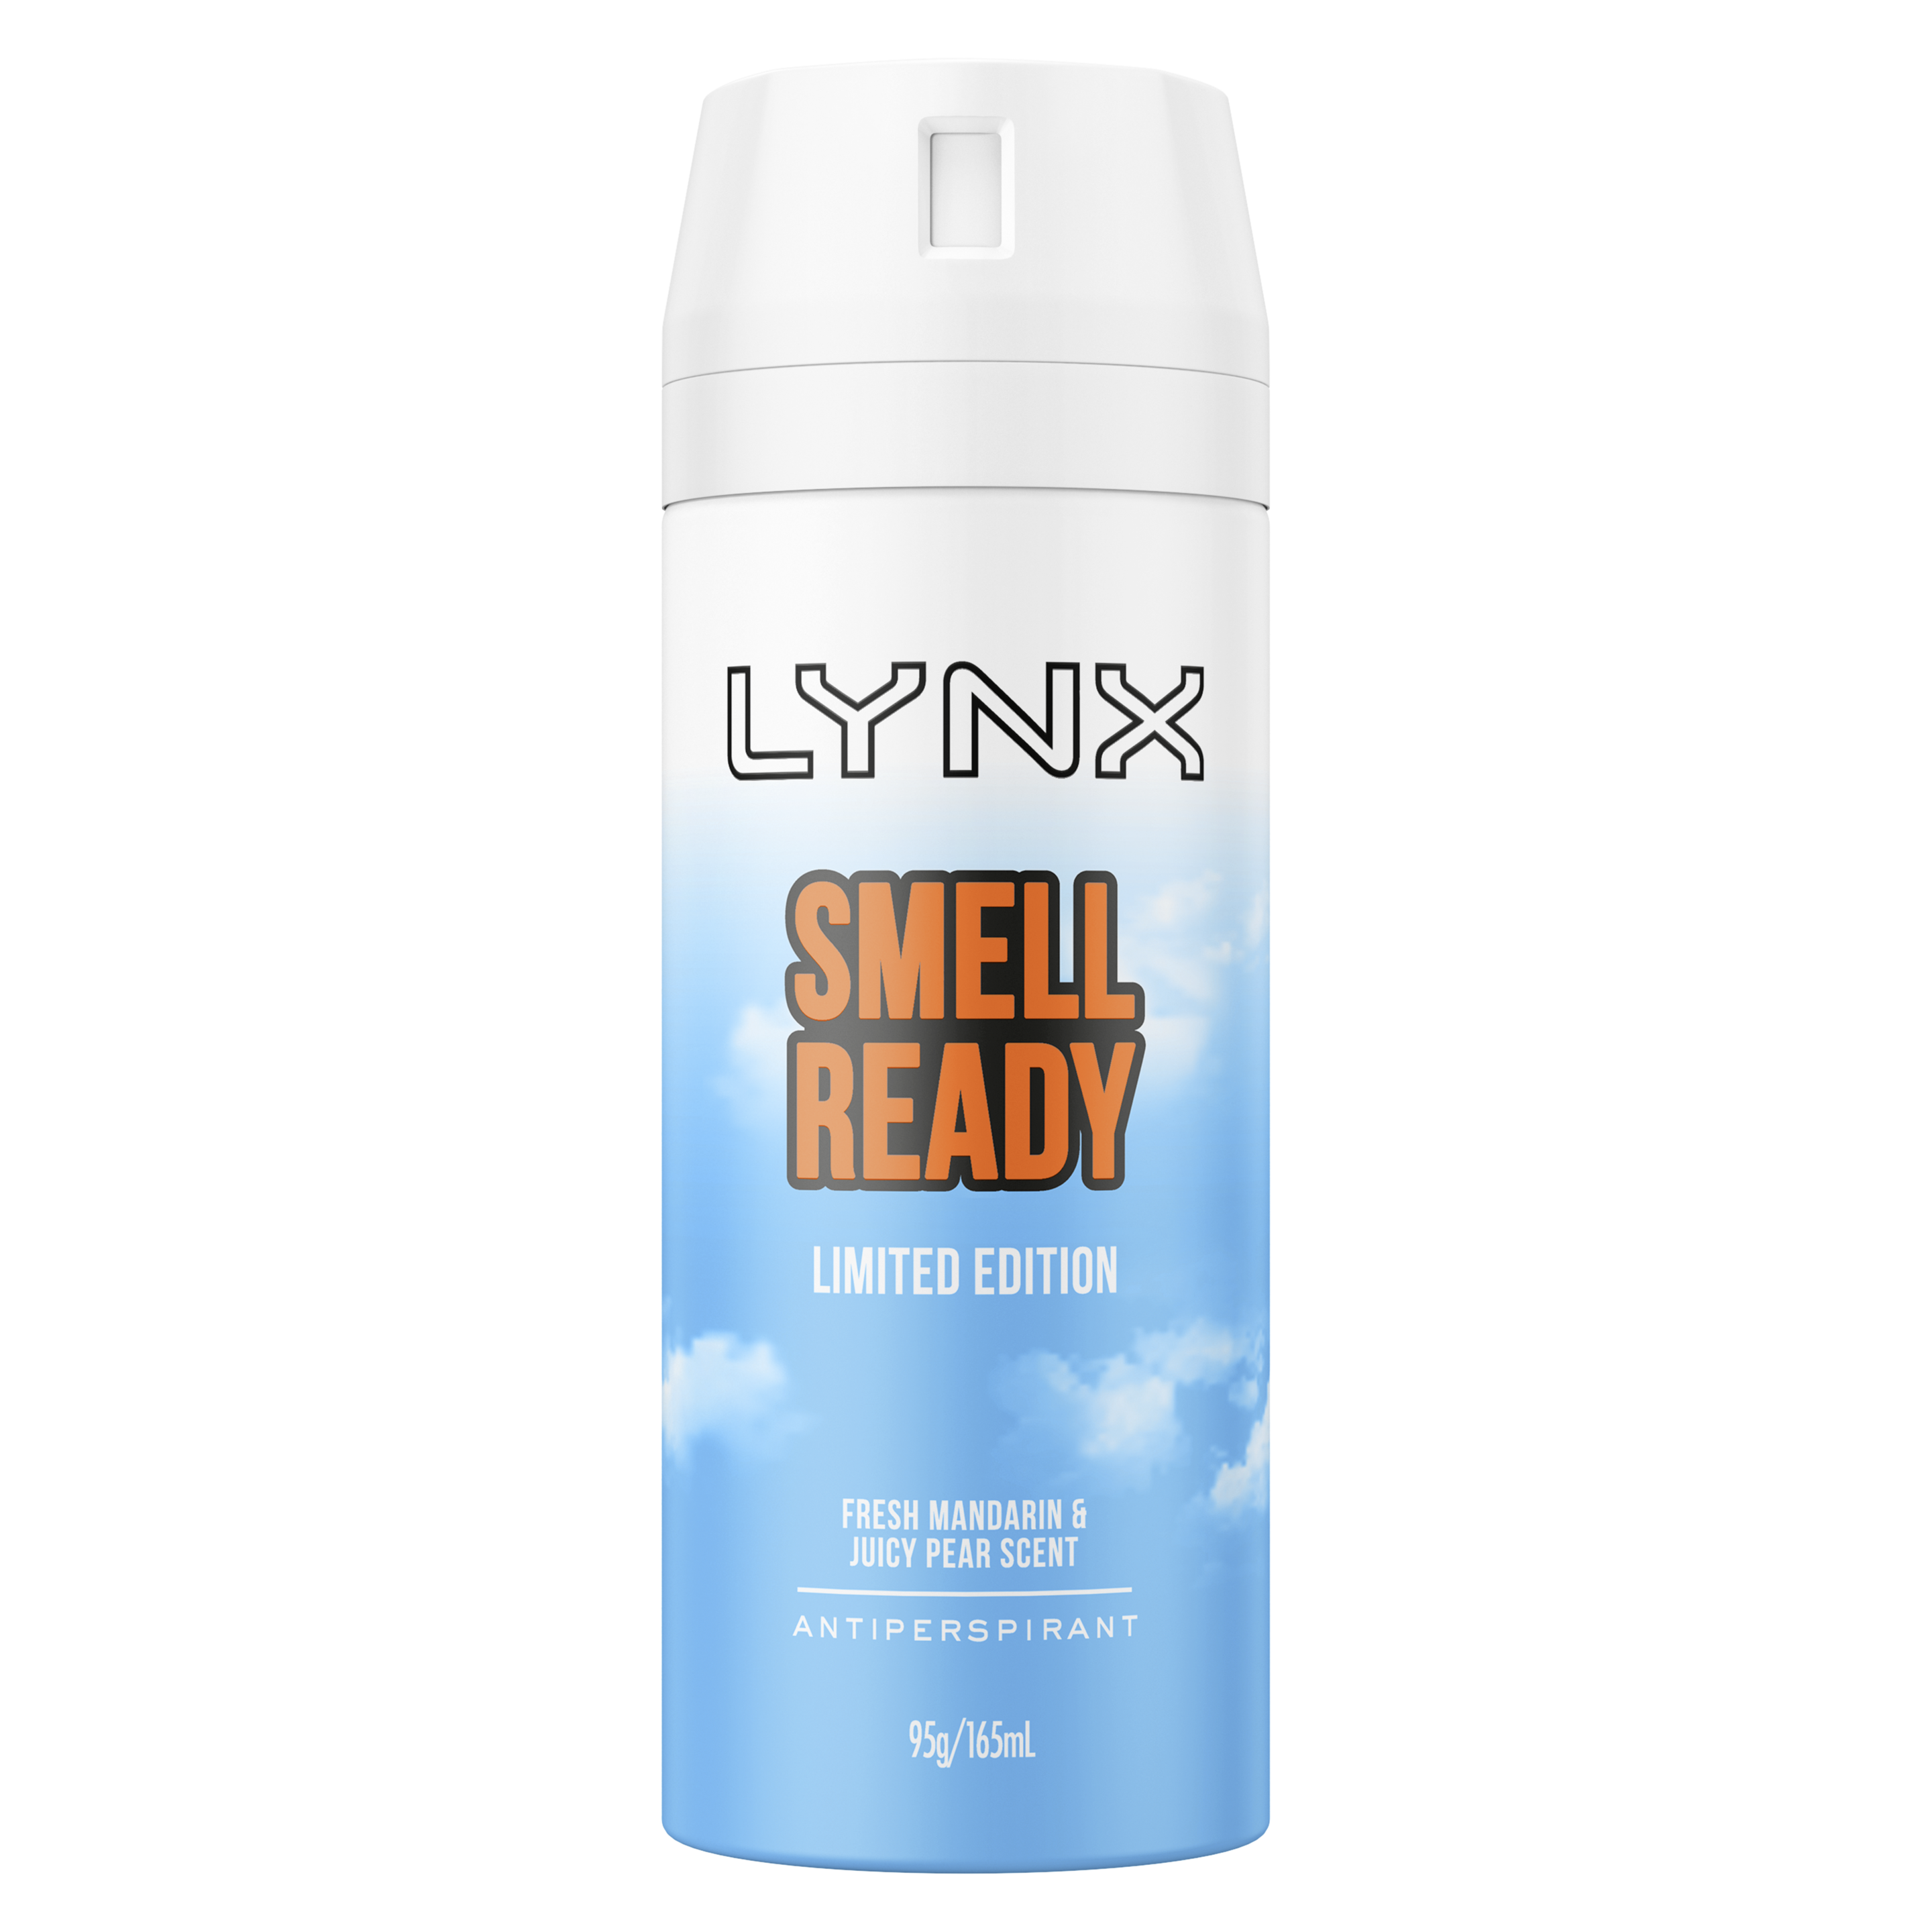 Lynx Smell Ready Limited Edition Antiperspirant